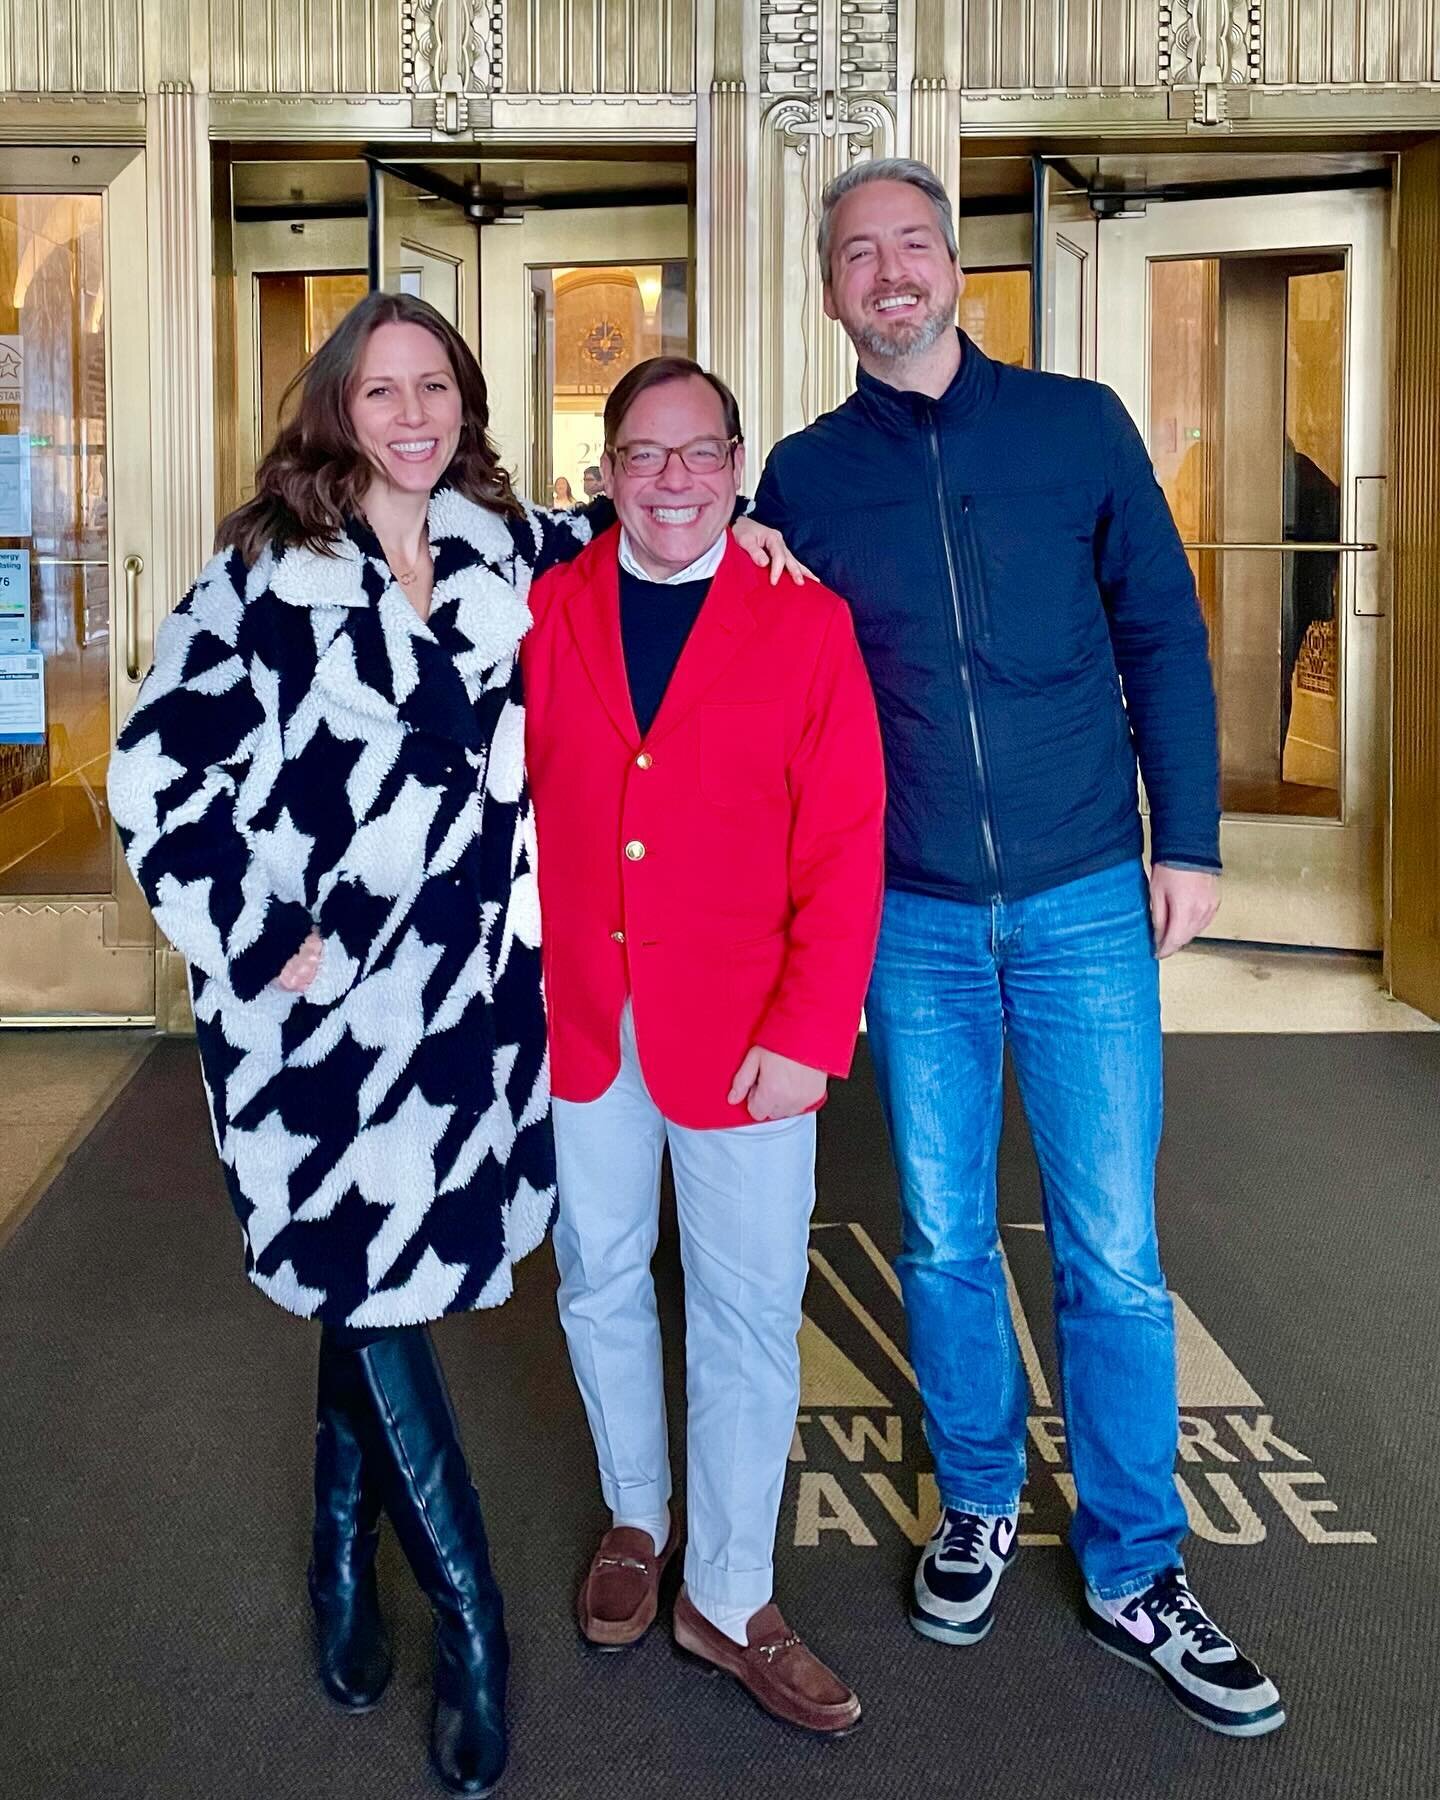 Congratulations to Manhattan&rsquo;s newest home owners! Thank you for your faith in me and all things Red Jacket. We promised a lot and delivered a lot more. Wishing you the very best in your new residence. 
www.redjacketresidential.com
When Only Th